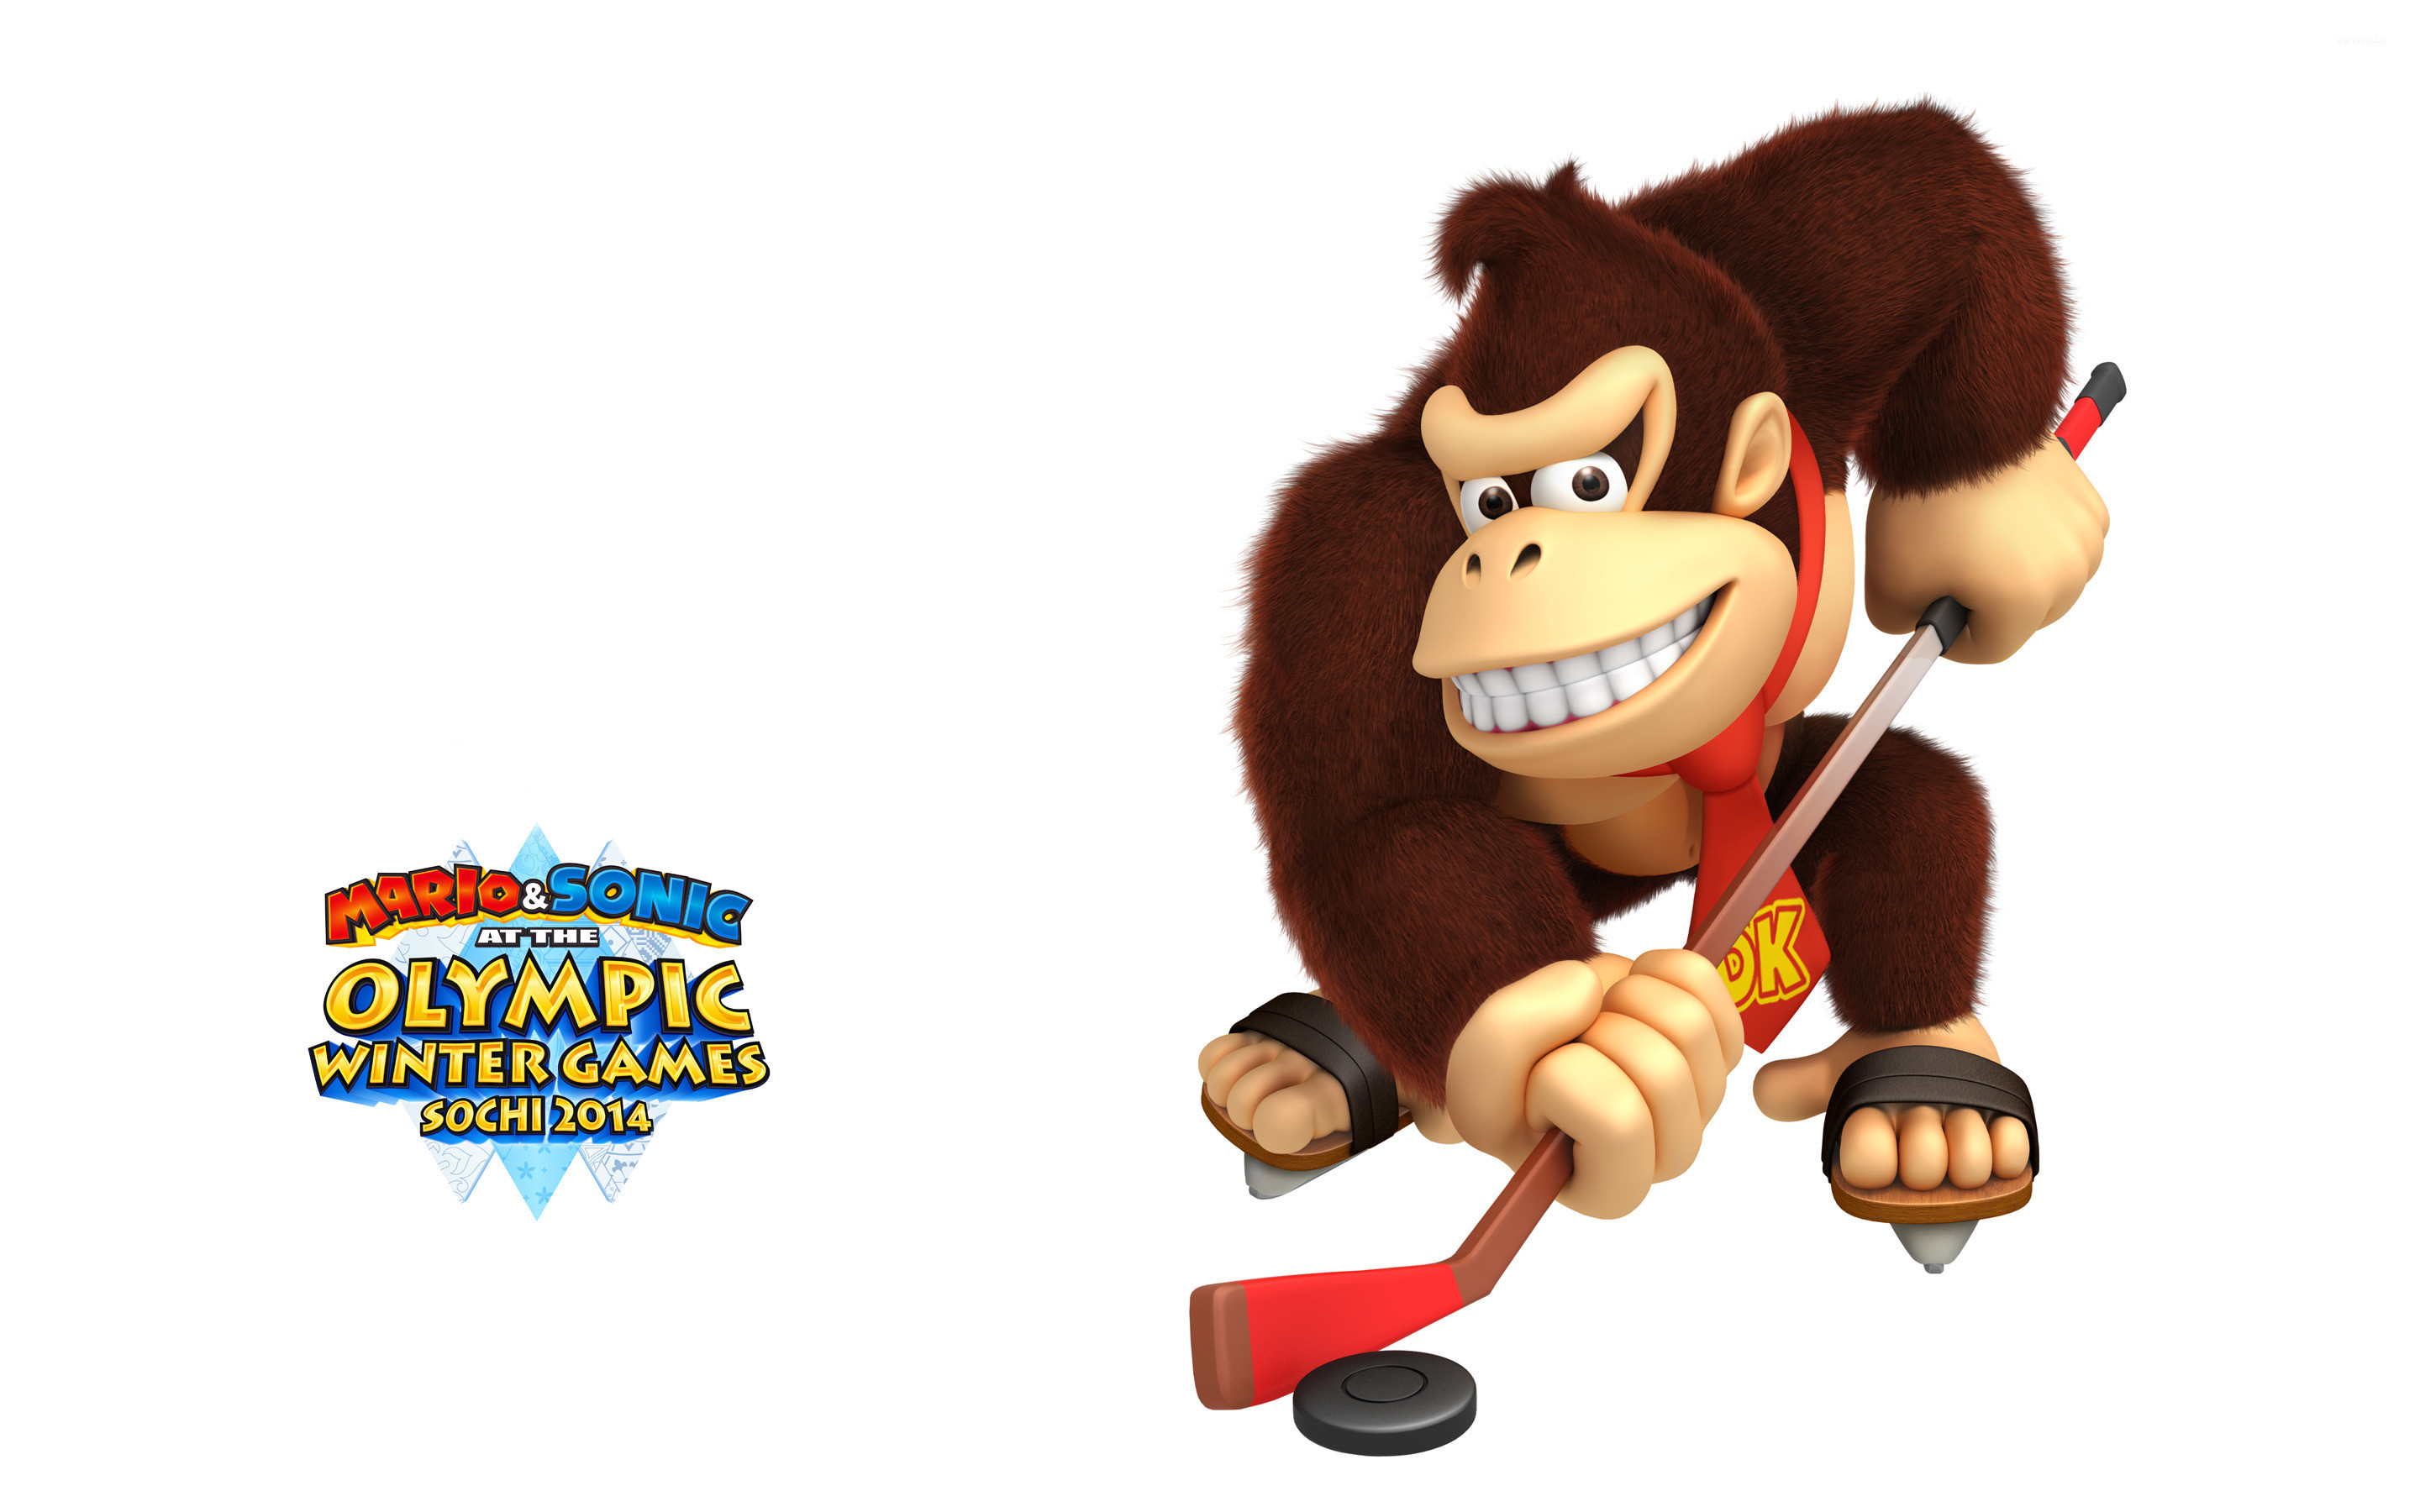 2880x1800 Mario & Sonic at the Sochi 2014 Olympic Winter Games [6] wallpaper